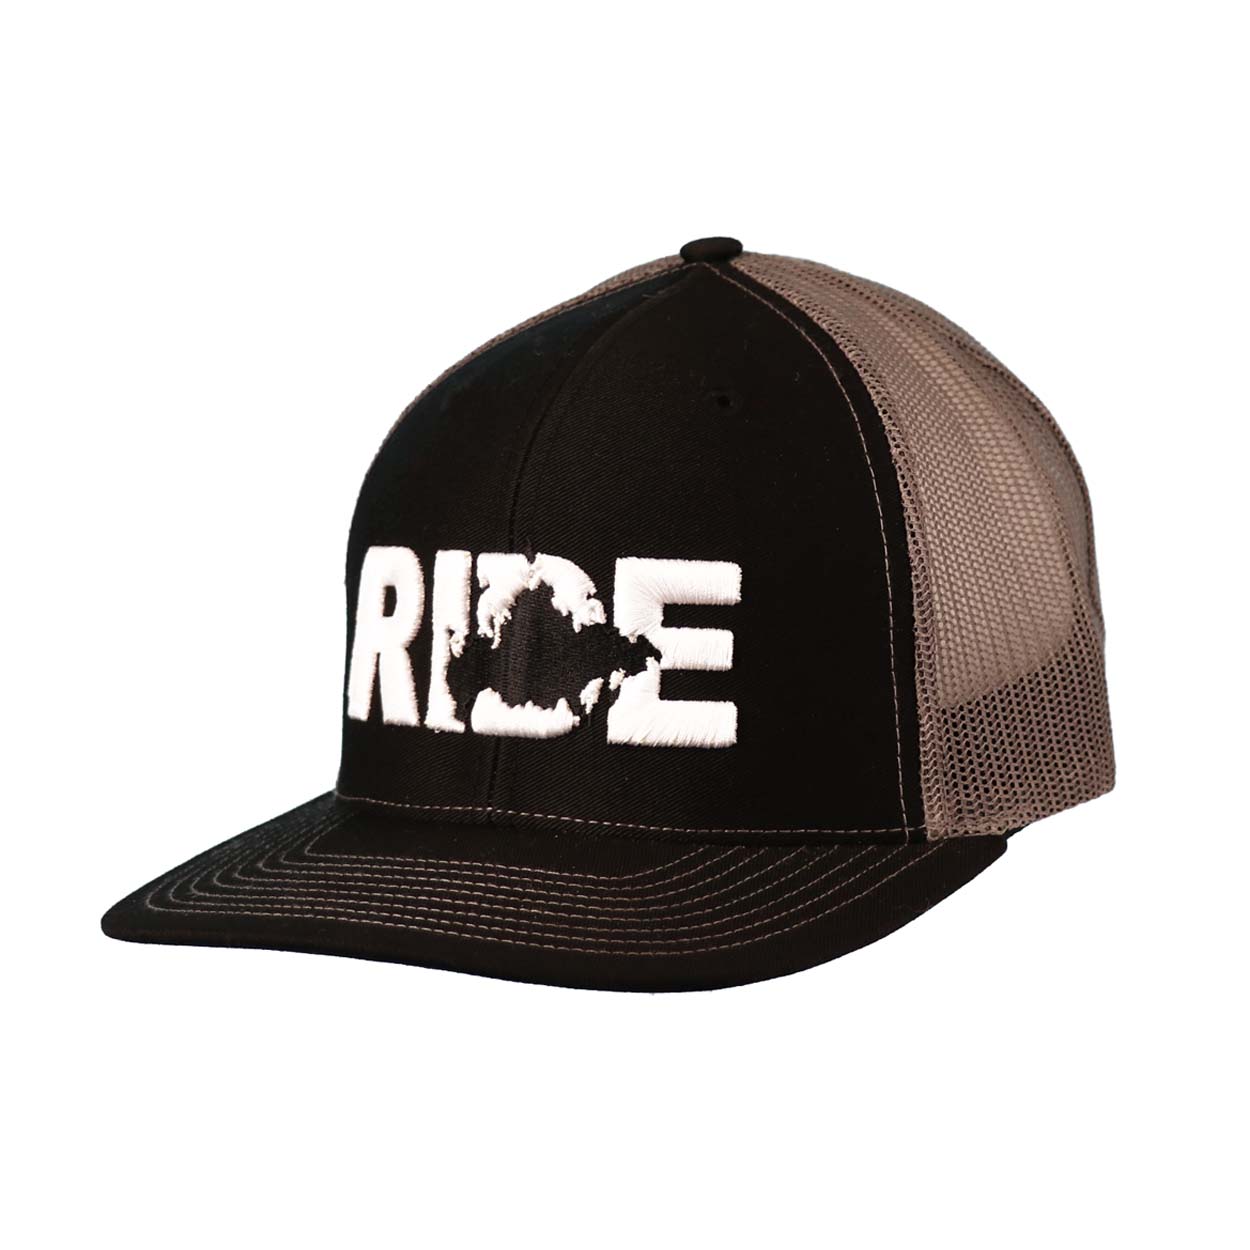 Ride Russia Classic Embroidered Snapback Trucker Hat Black/Charcoal